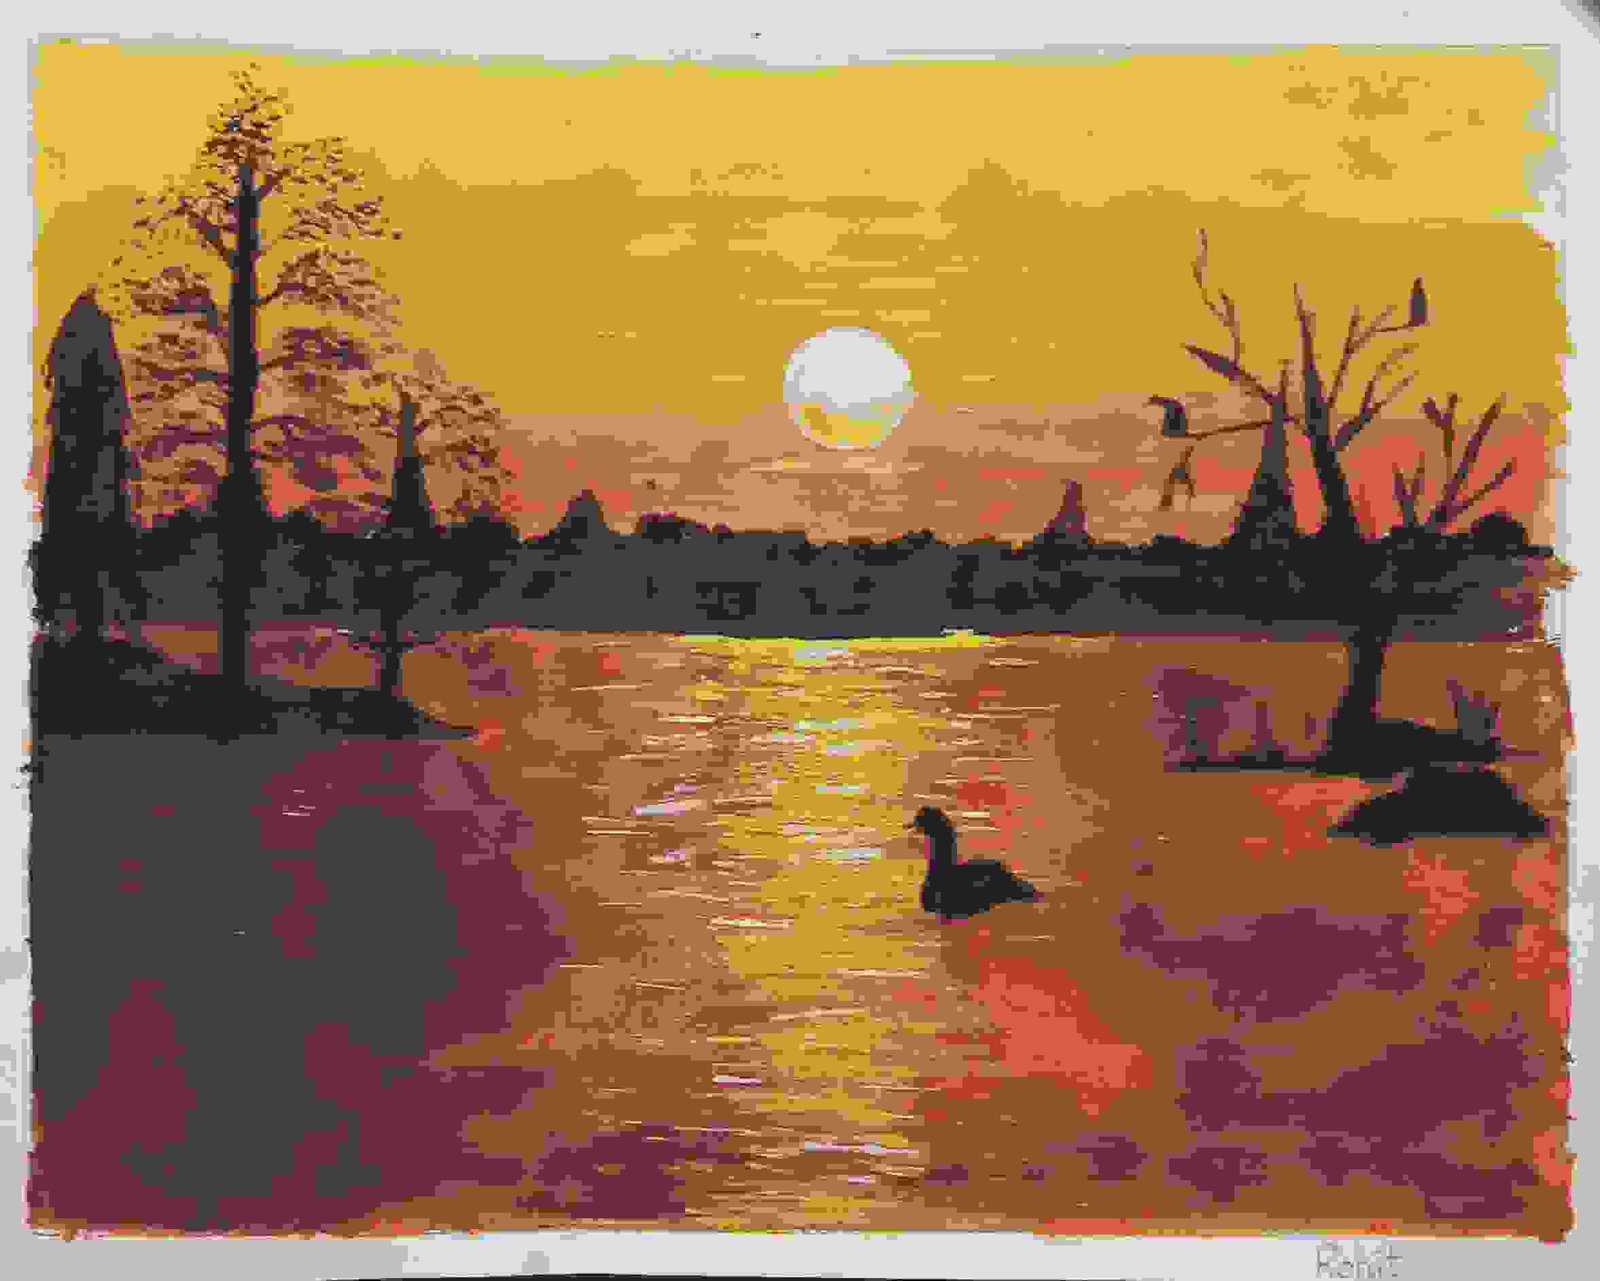 Painting Of River During A Sunset In It Was Drawn Using Acry